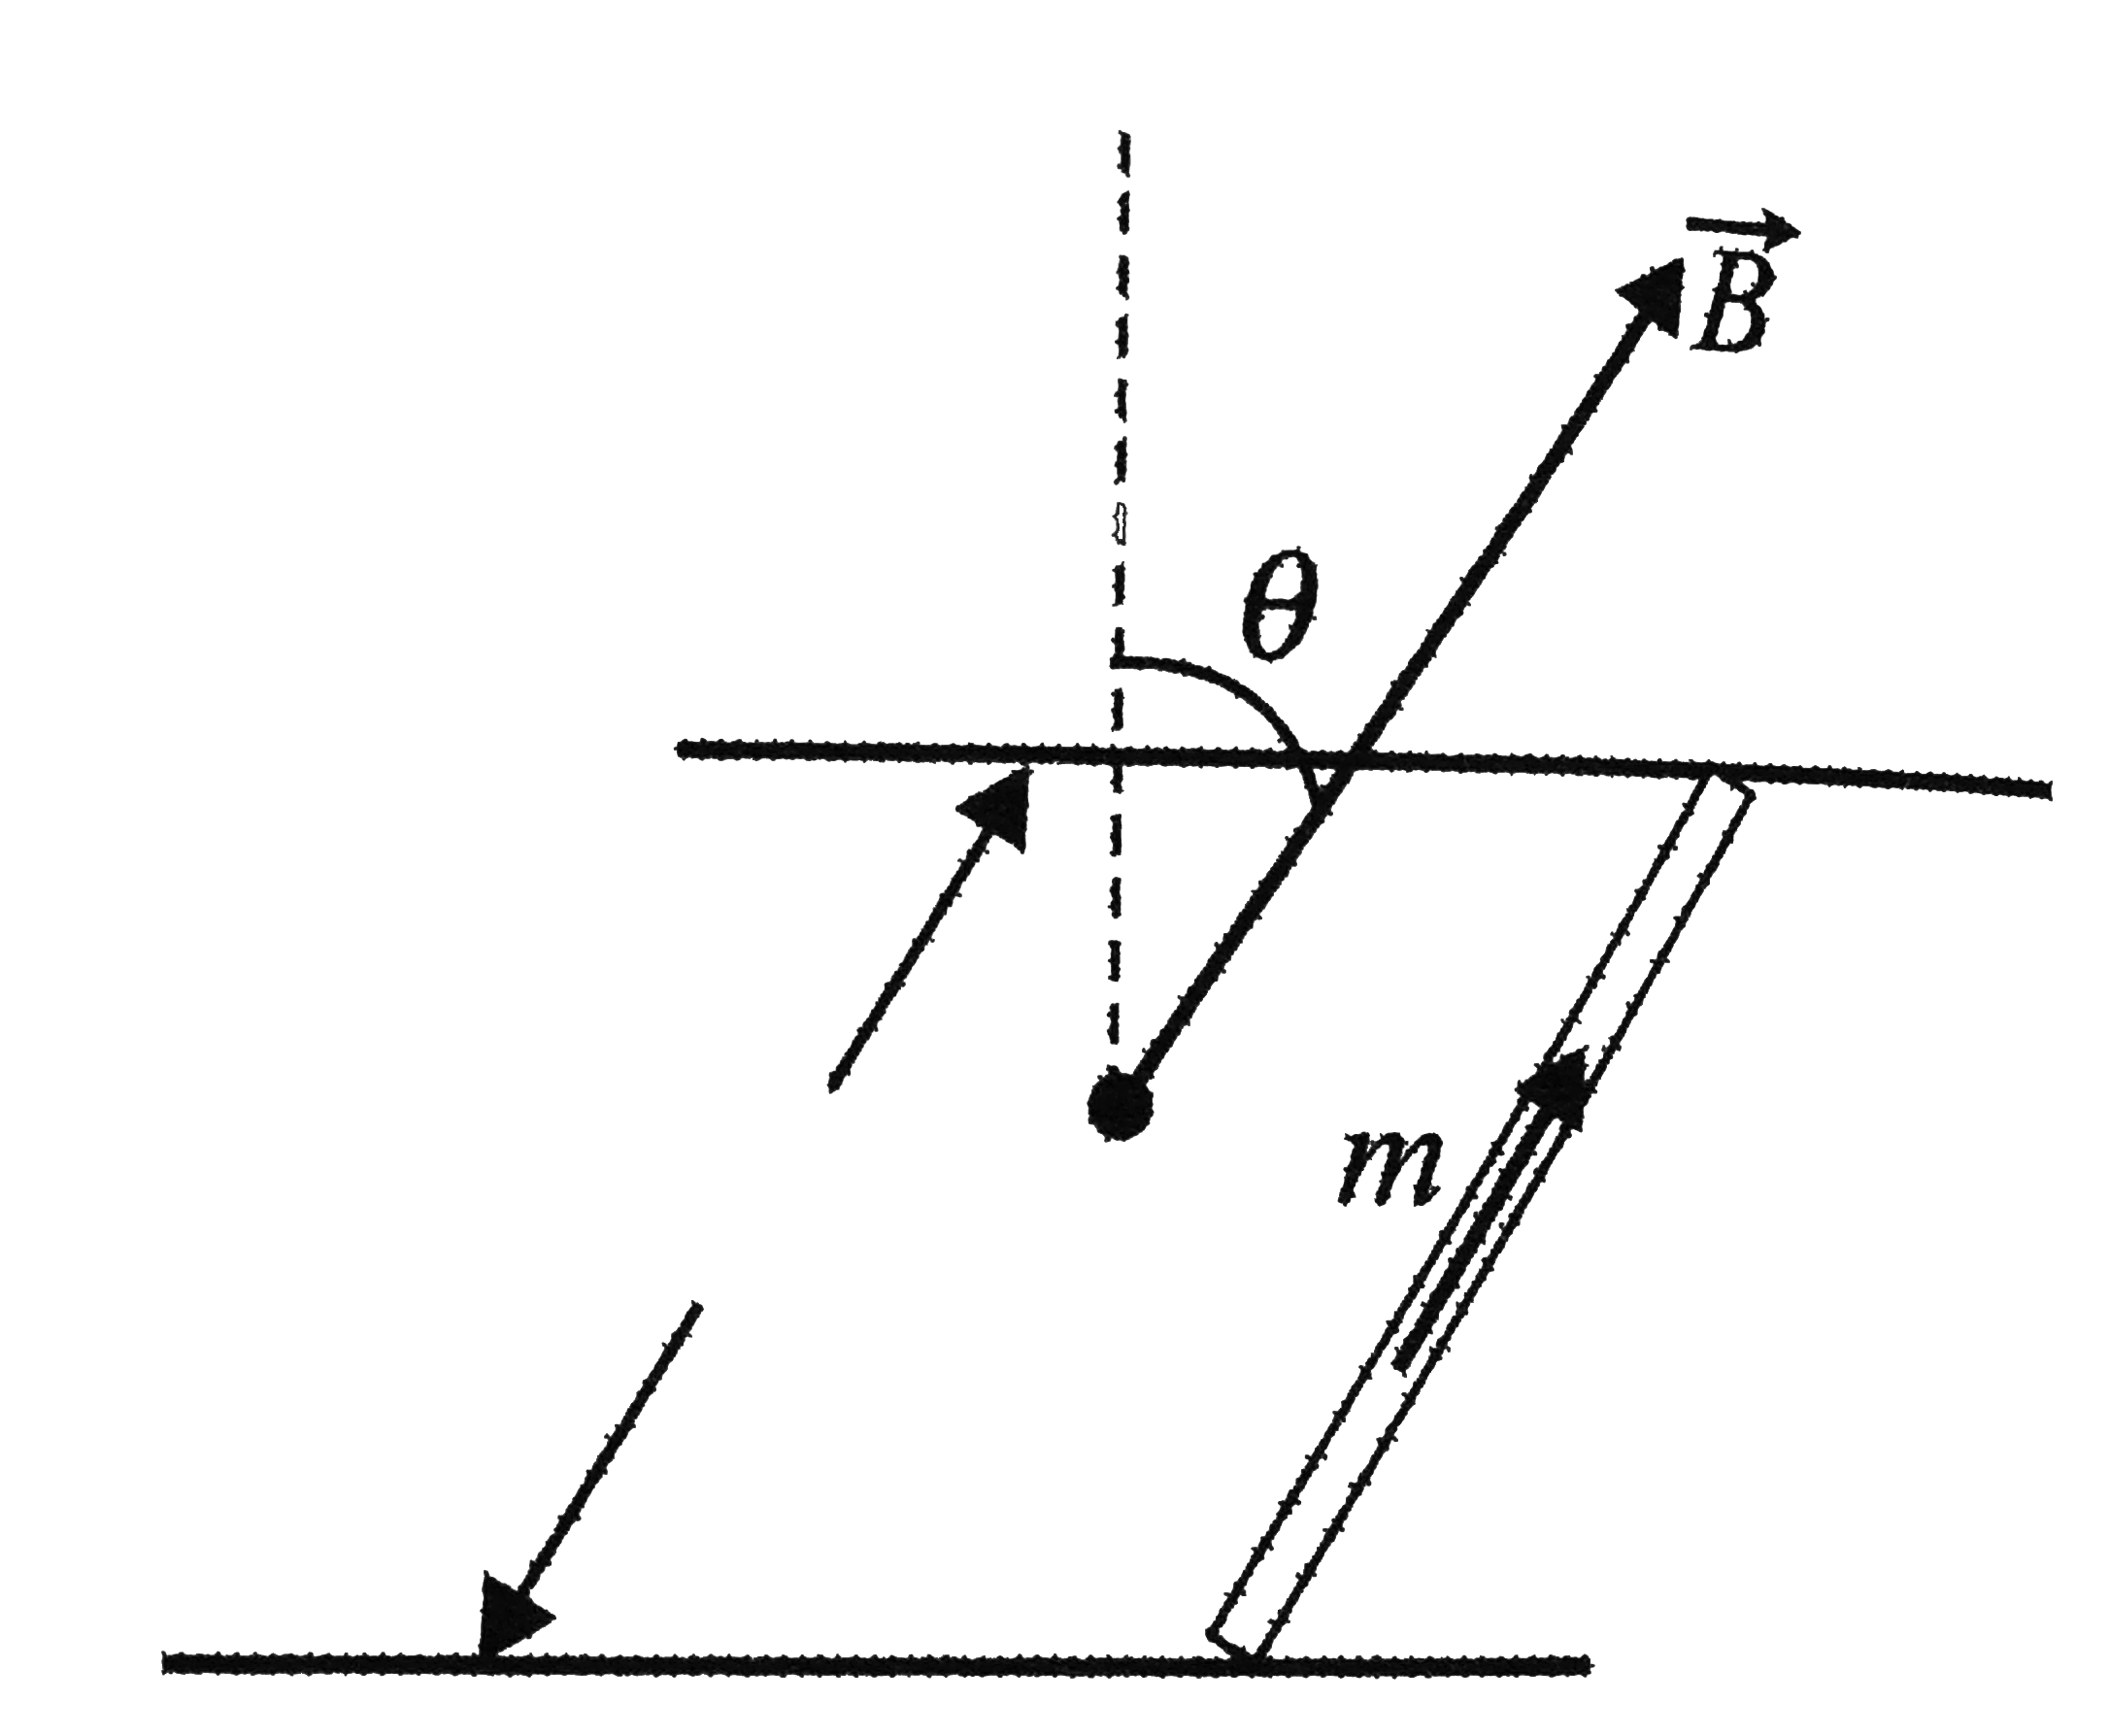 A conductor (rod) of mass m, length l carrying a current i is subjected to a magnetic field of induction B. If the coefficients of friction between the conducting rod and rail is mu, find the value of I if the rod starts sliding.